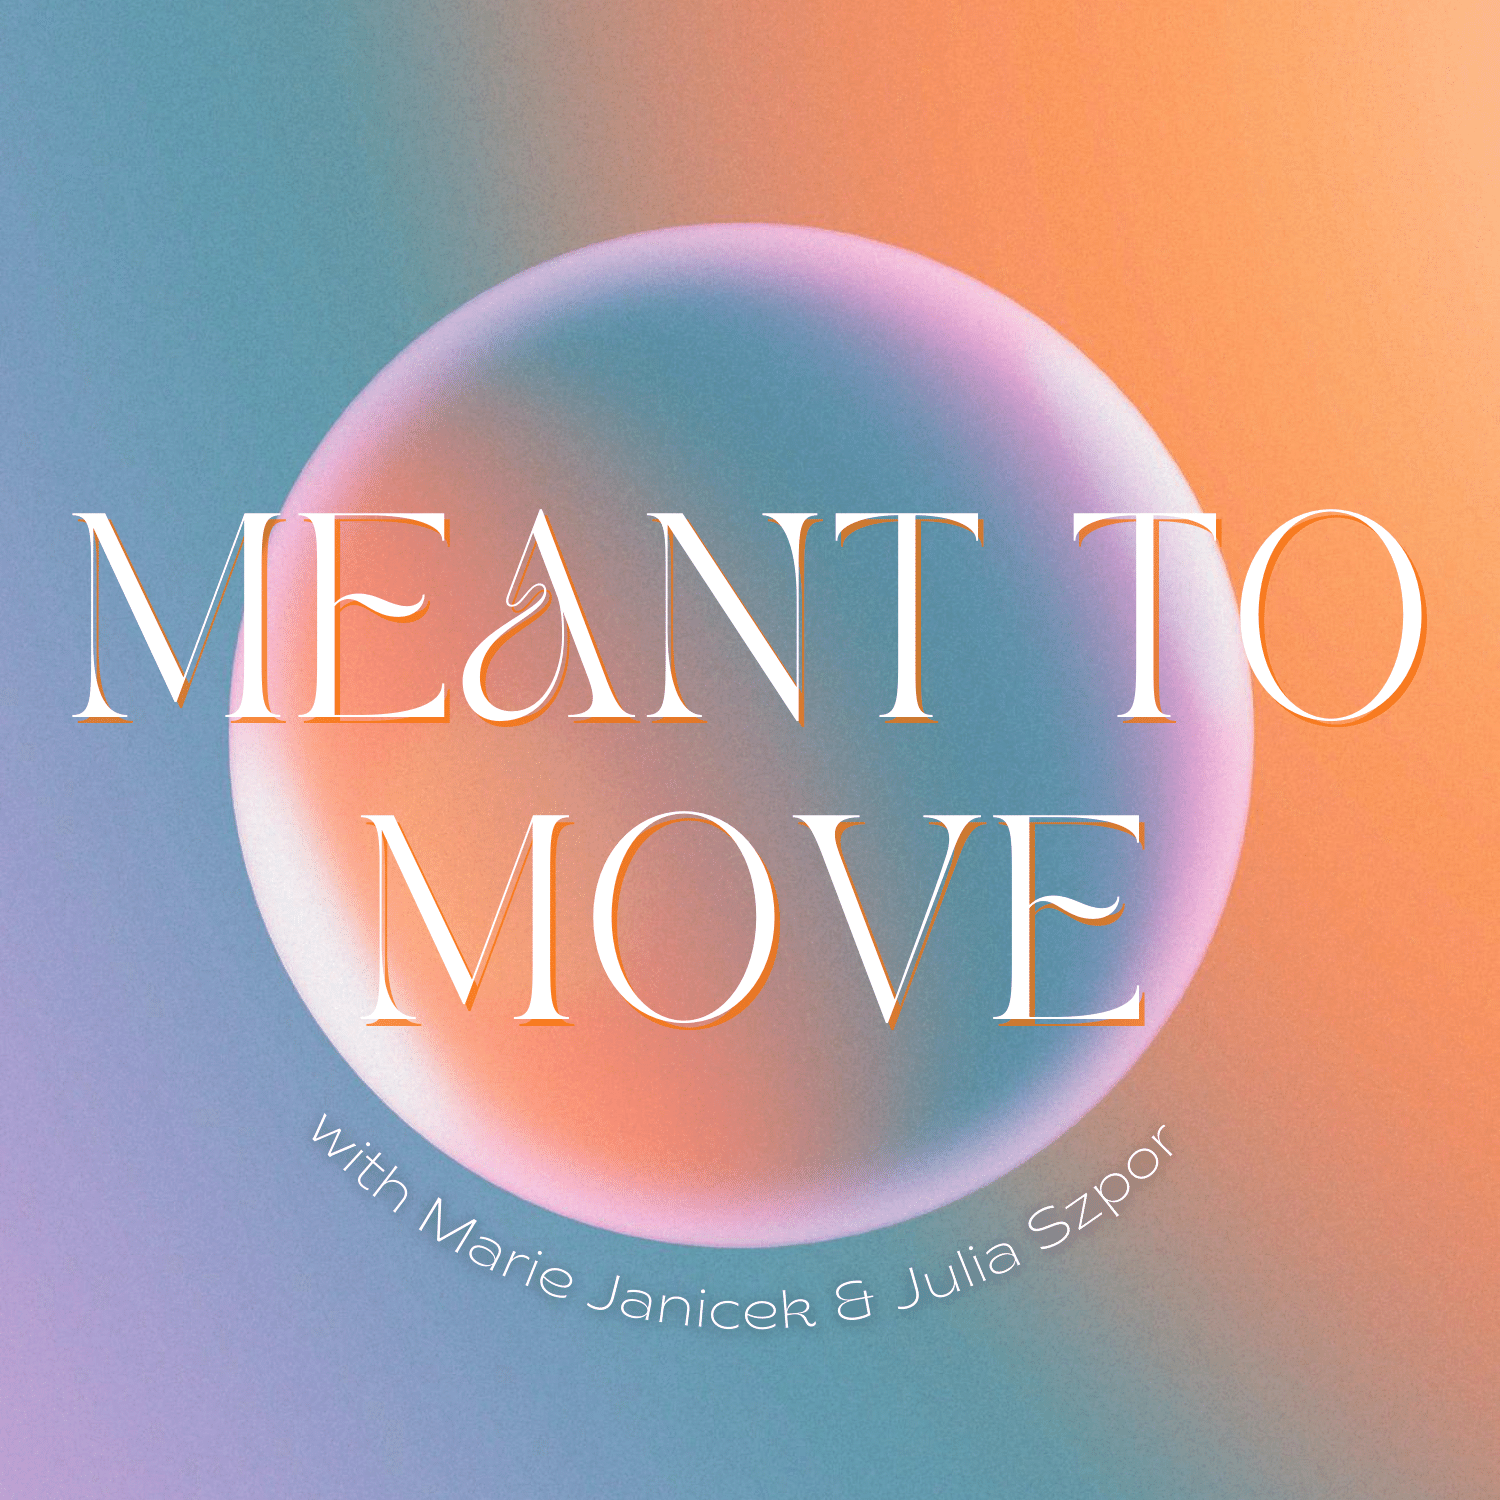 Artwork for podcast This Thing Called Movement